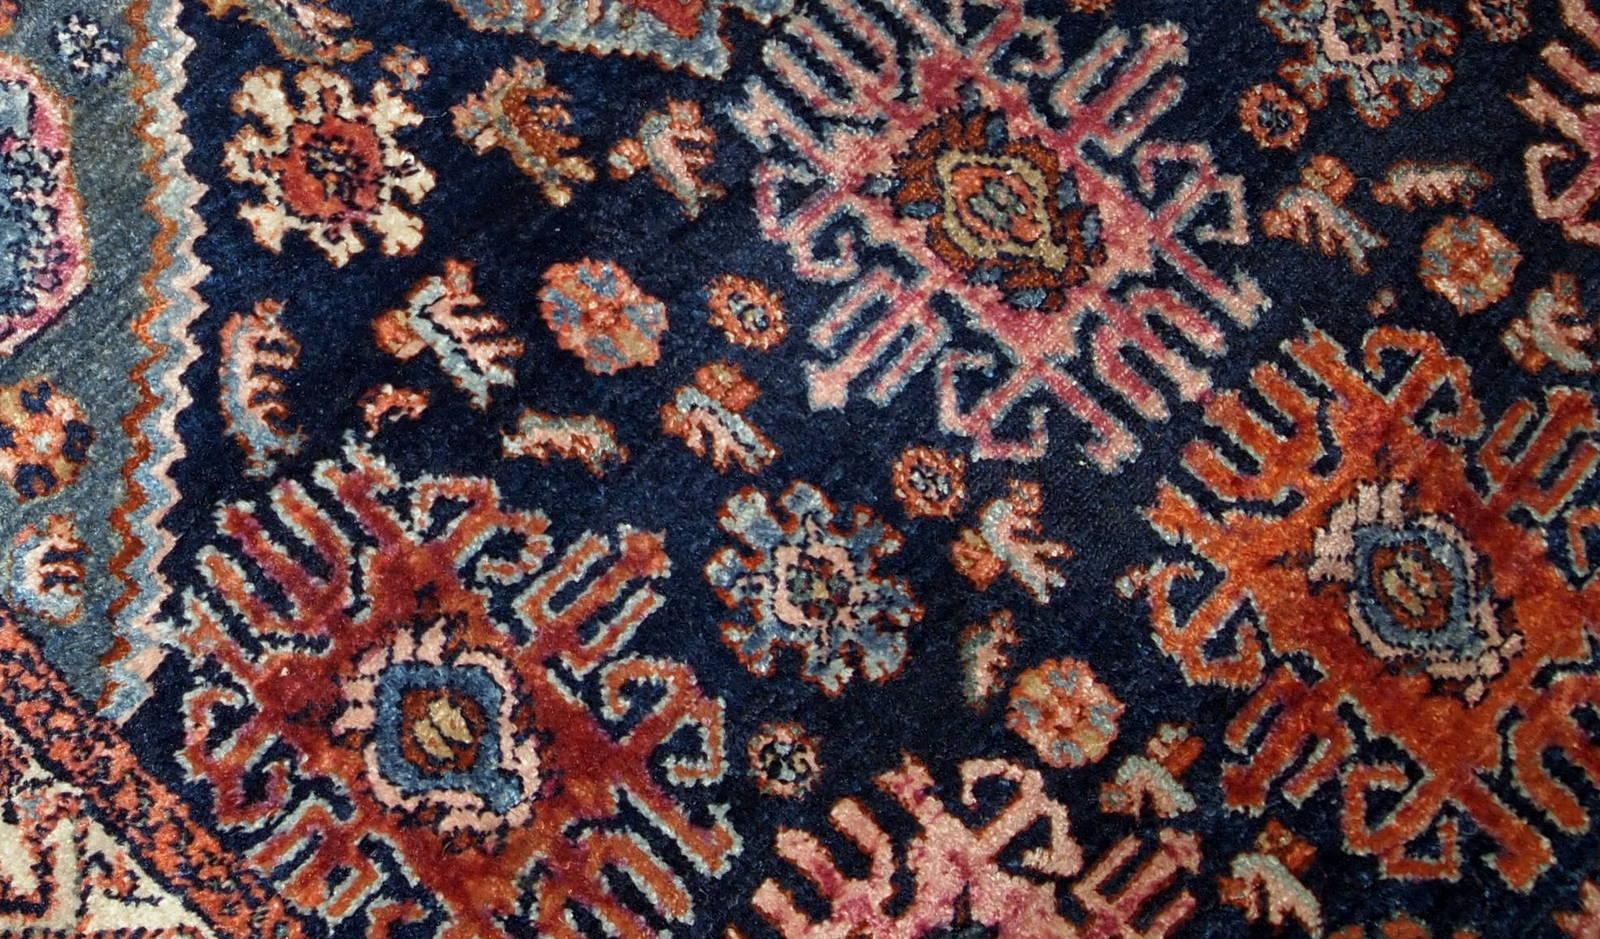 Handmade antique Malayer rug from the beginning of 20th century. The rug is in original good condition, has all-over design on navy blue background.

-condition: original good,

-circa: 1910s,

-size: 4.1' x 6.3' (125cm x 192cm),

-material: